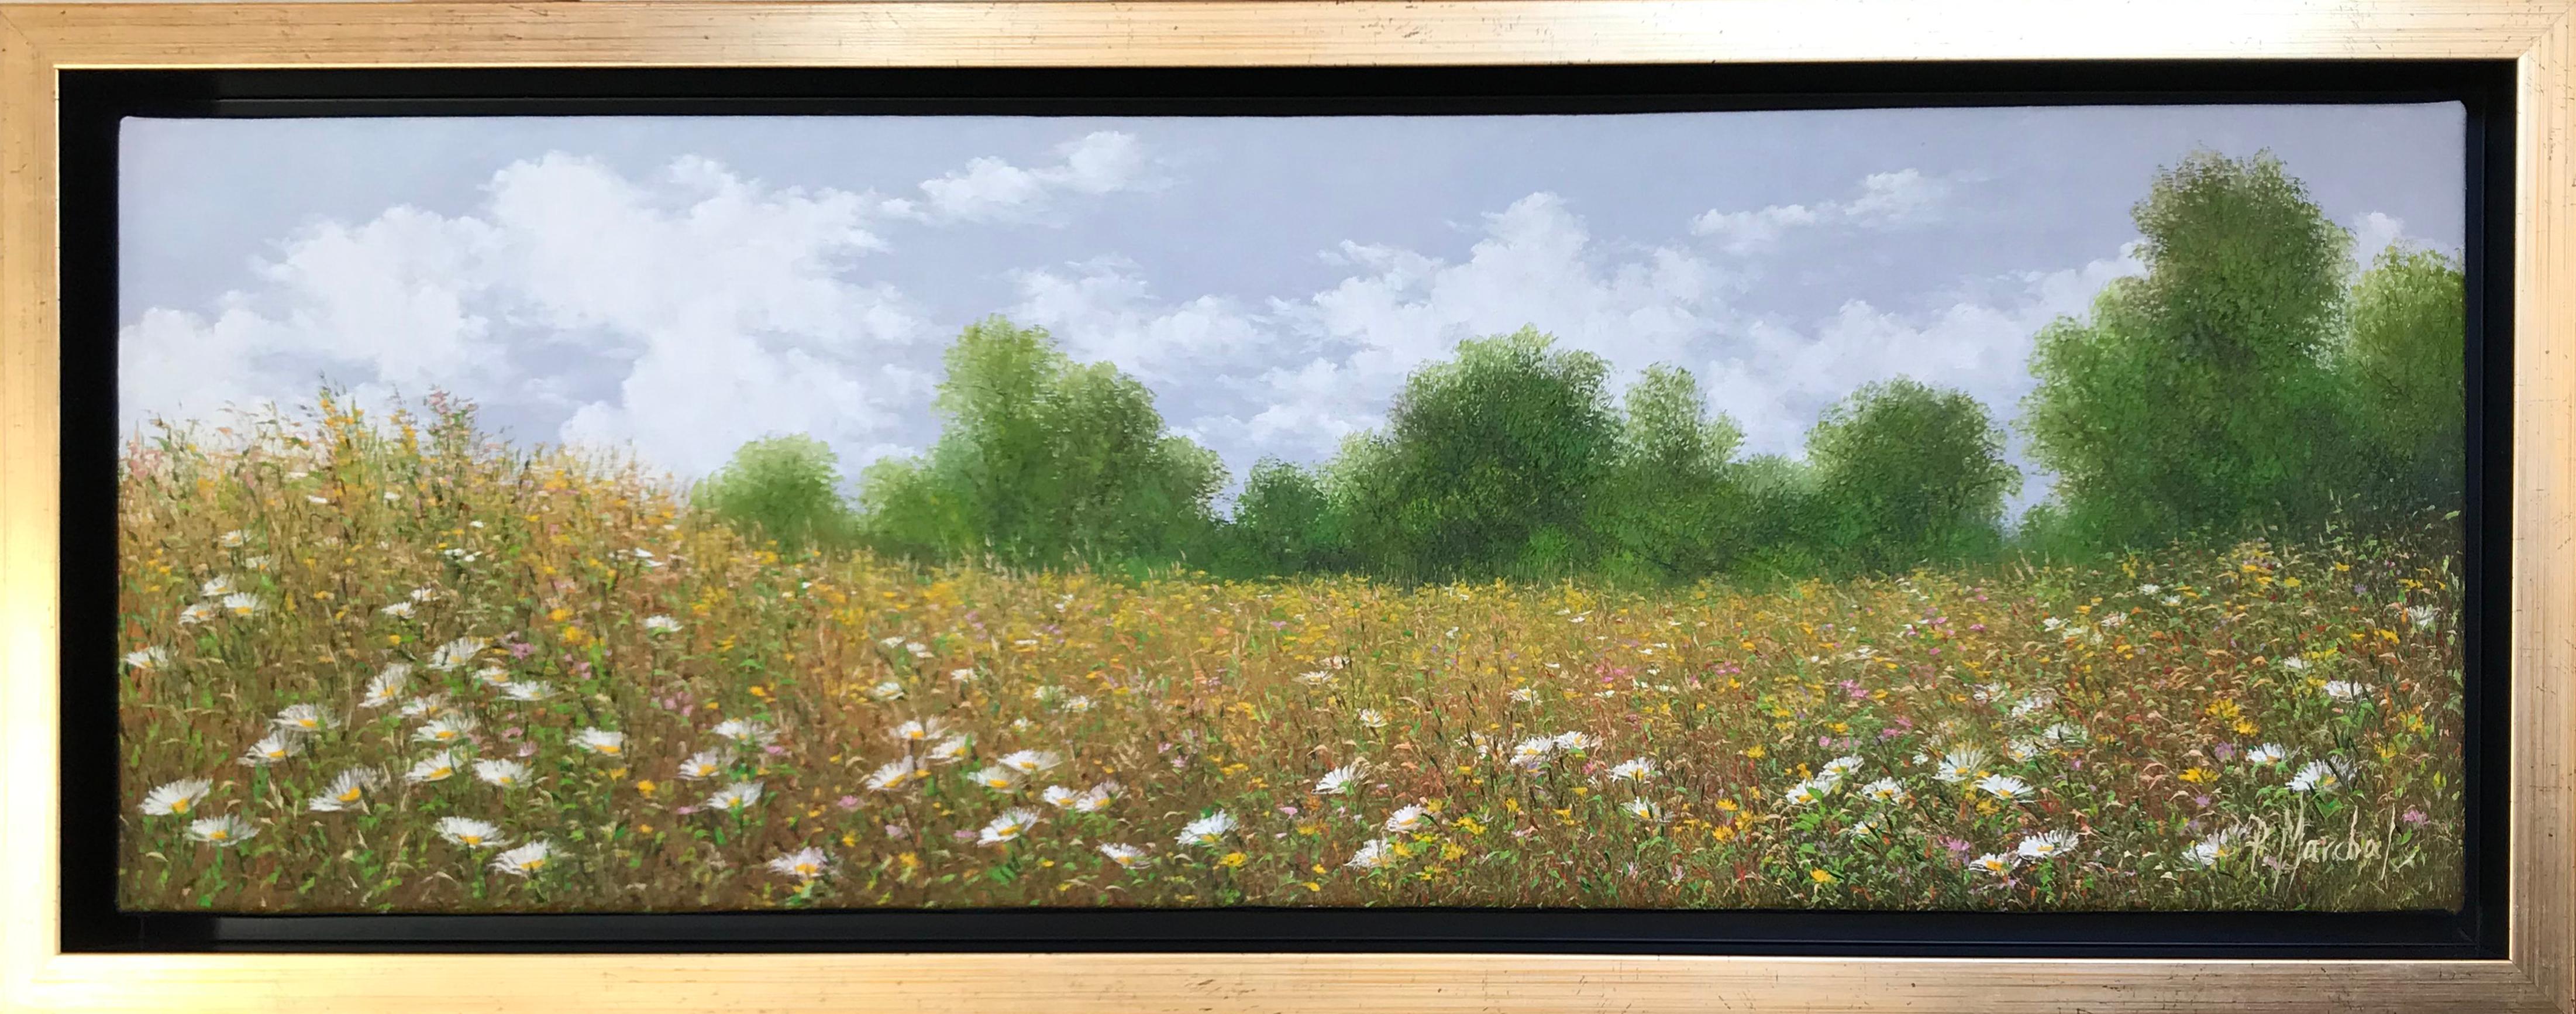 Champ fleuri , 2019, oil painting on canvas , size with frame 25.4 x 65.4 cm  - Painting by Patrice Marchal